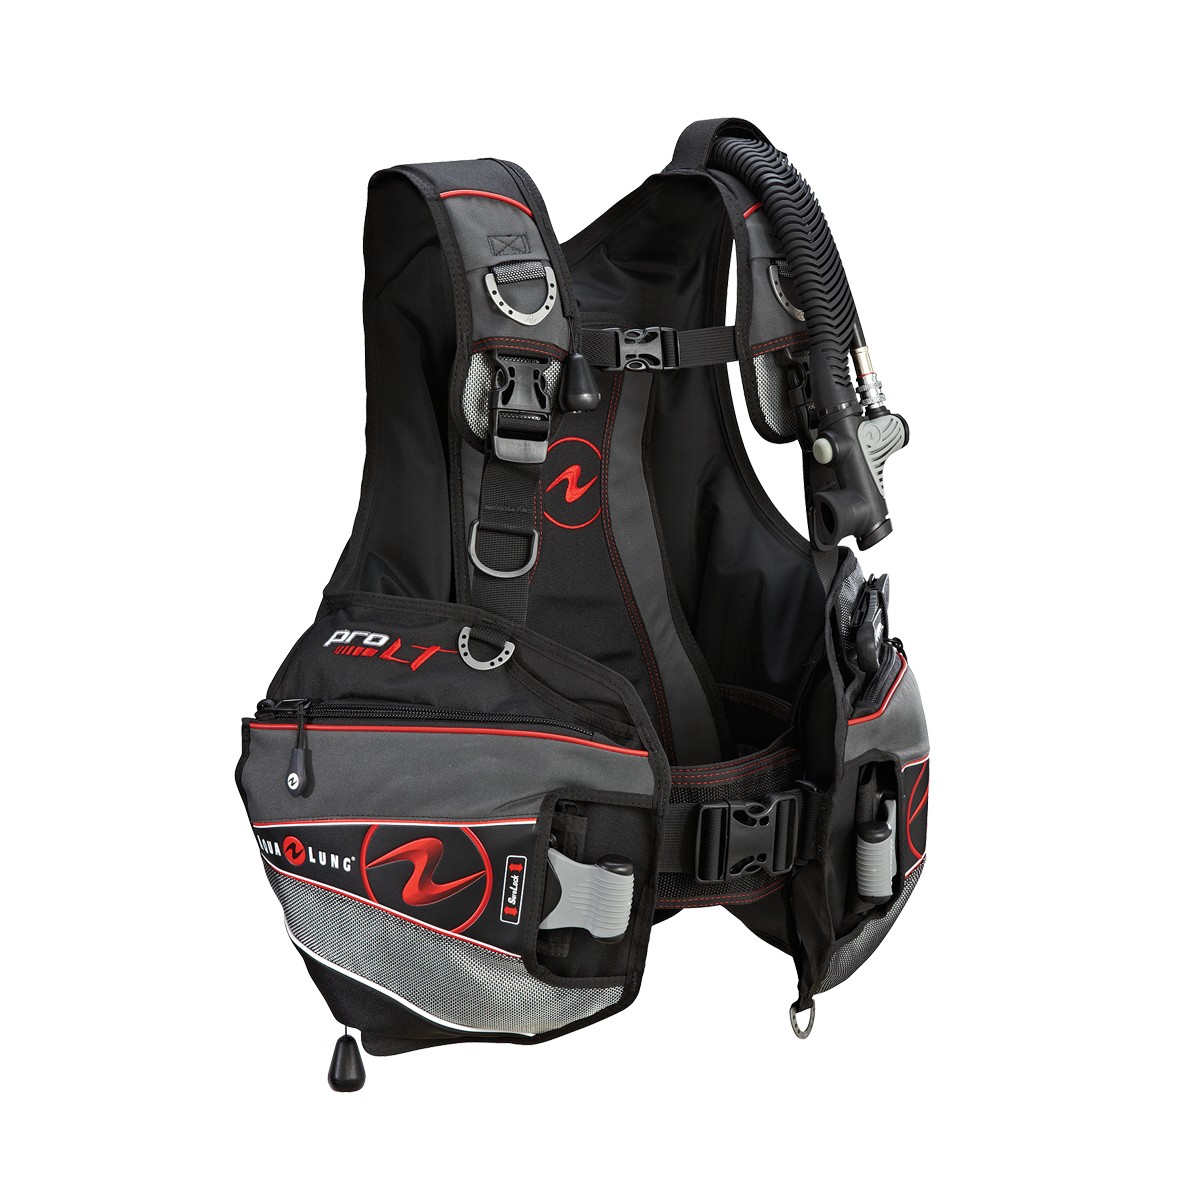 Aqua Lung Pro LT - ADV Style, Weight Intergrated BCD - DiveThings